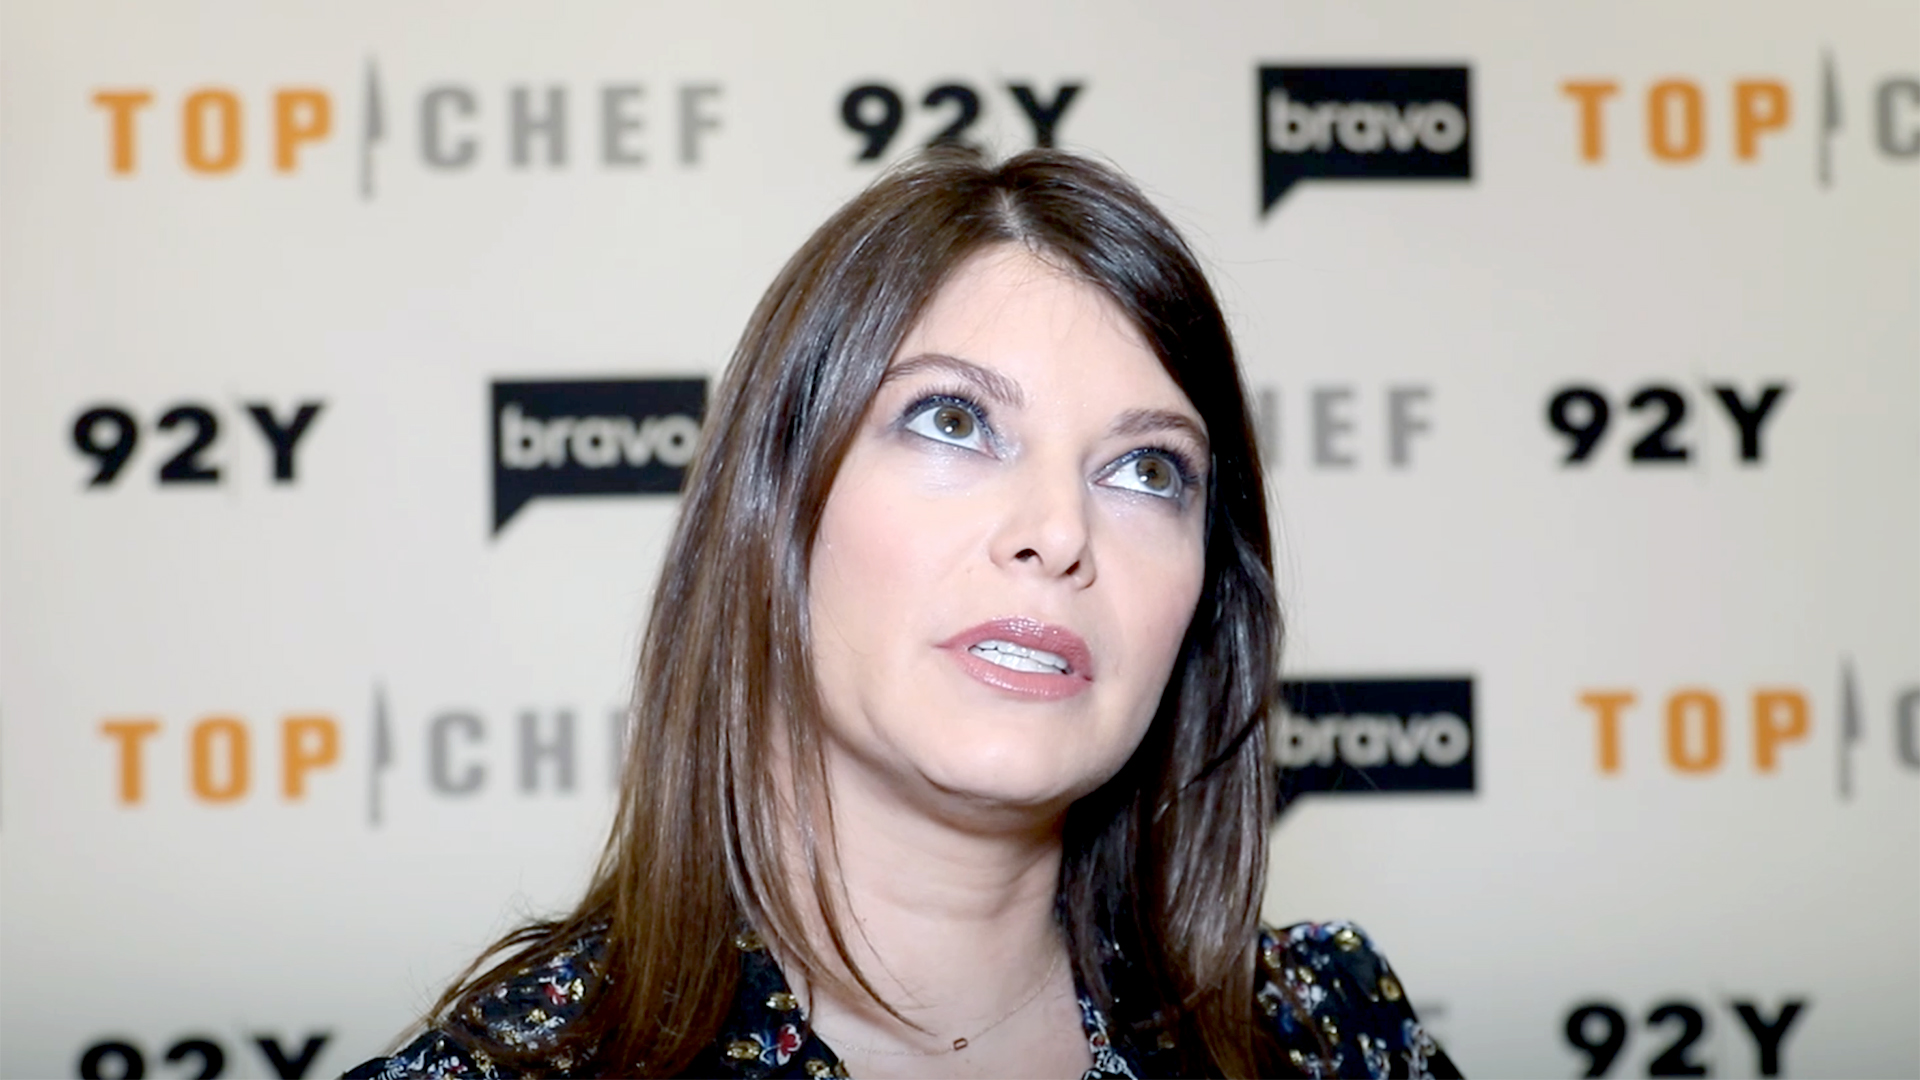 Top Chef Judge Gail Simmons Pregnant: Baby Bump Photo The Daily Dish